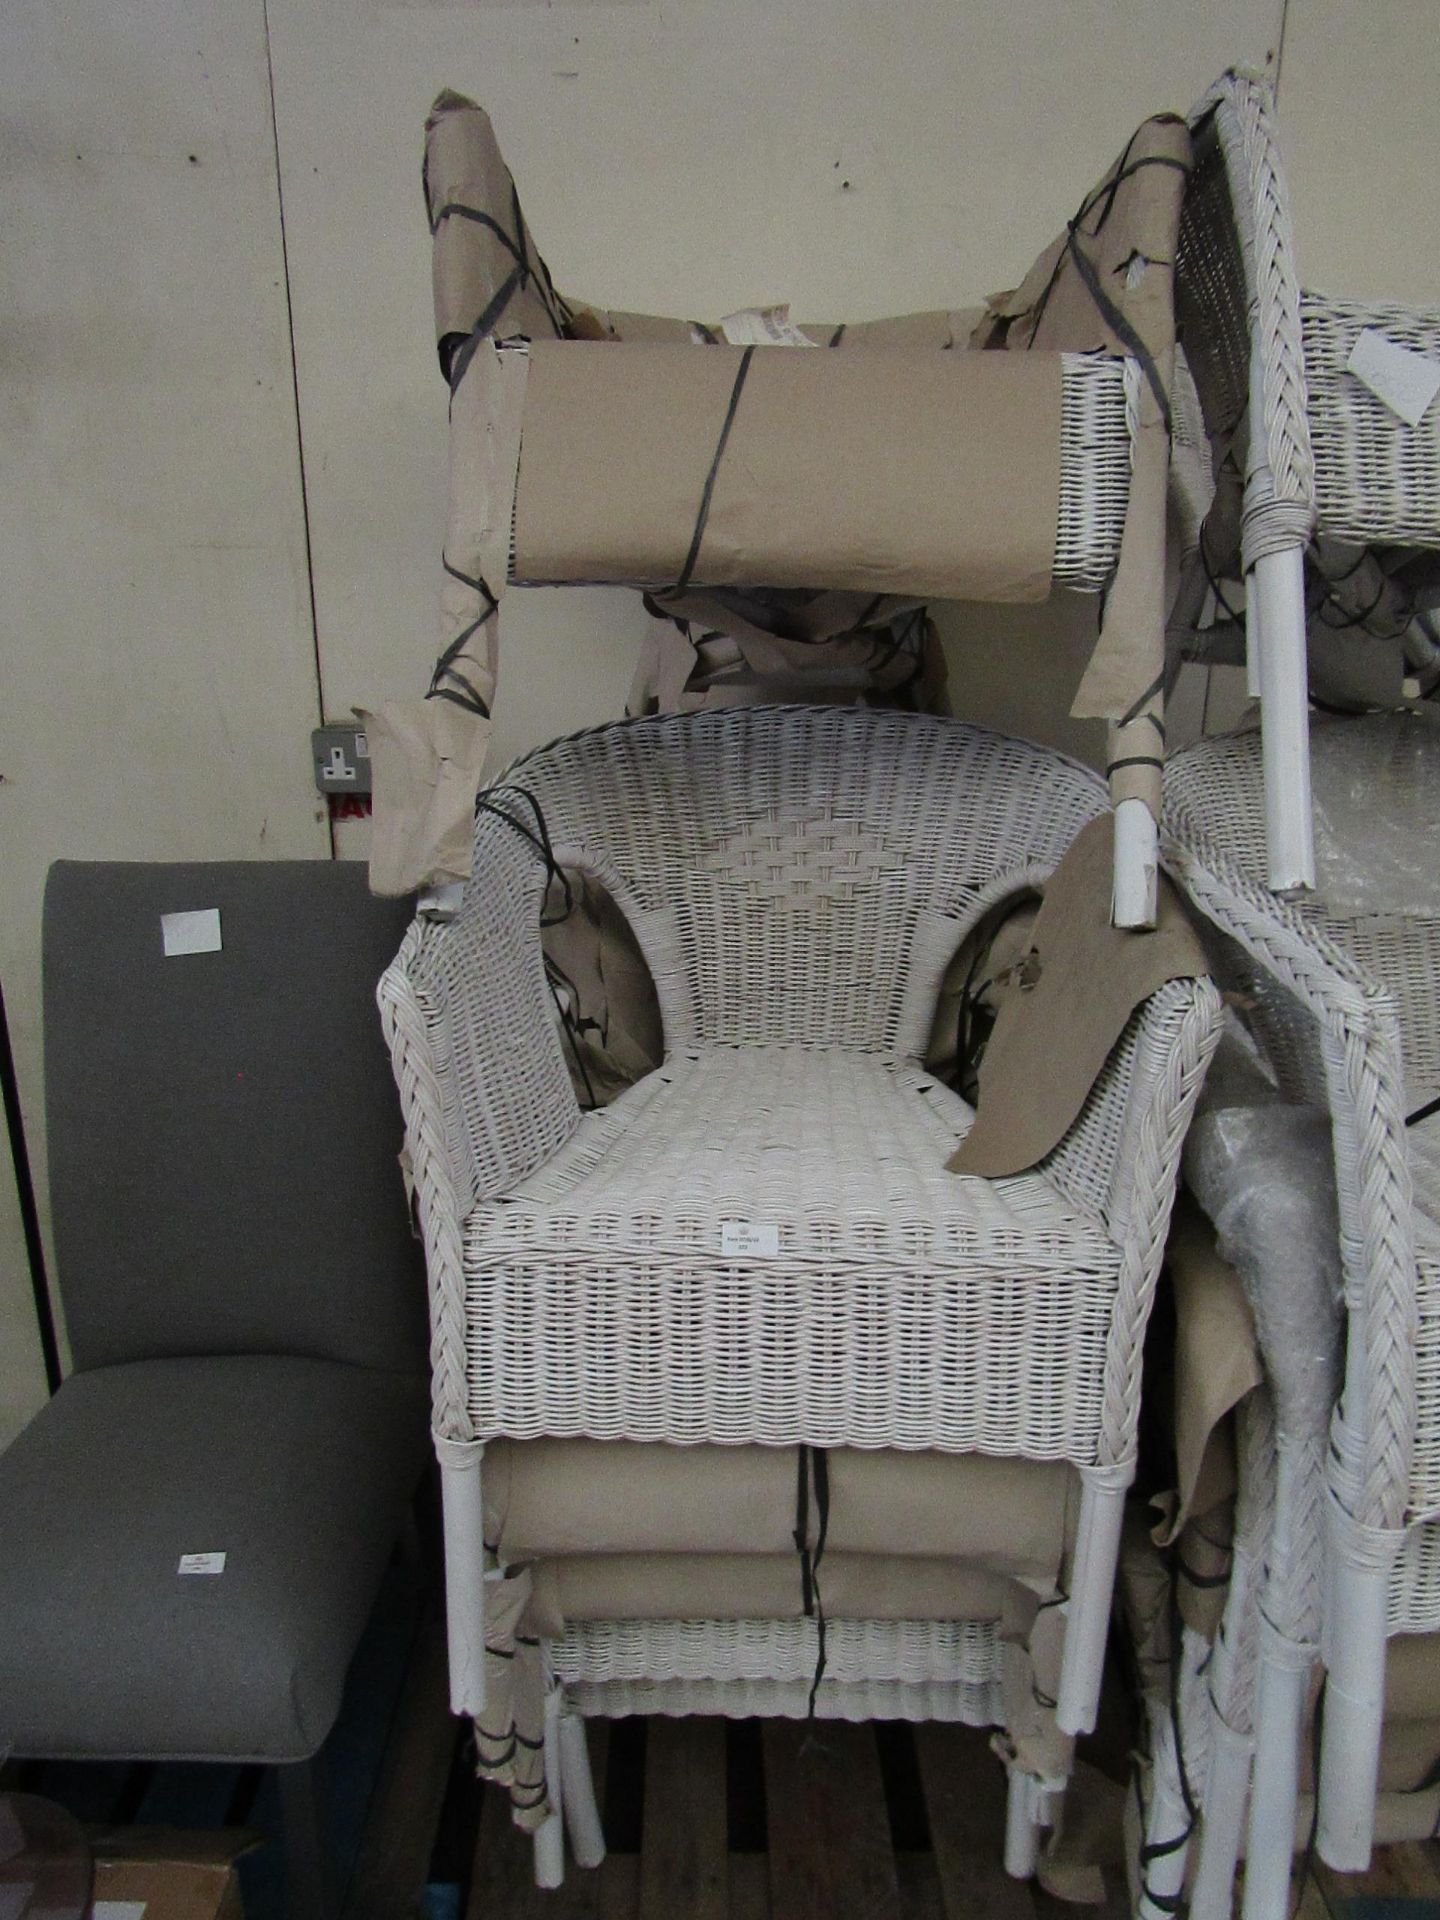 | 6X | RATTAN GARDEN CHAIRS, WHITE/OFF-WHITE | SOME SCUFFS MAINLY ON THE LEGS | VIEWING